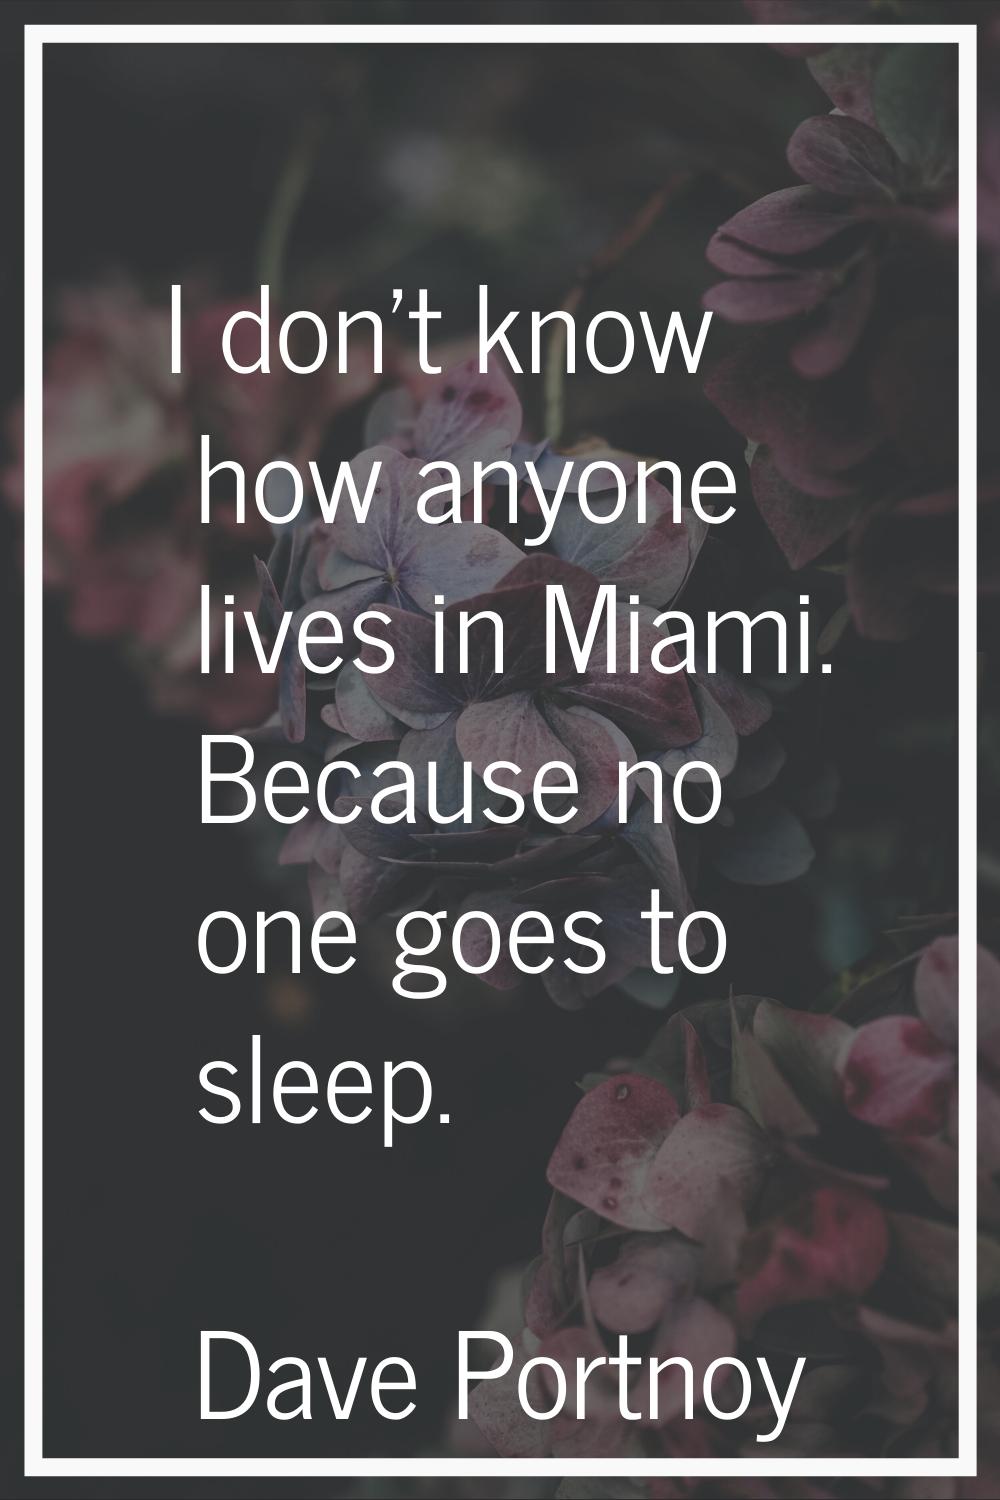 I don't know how anyone lives in Miami. Because no one goes to sleep.